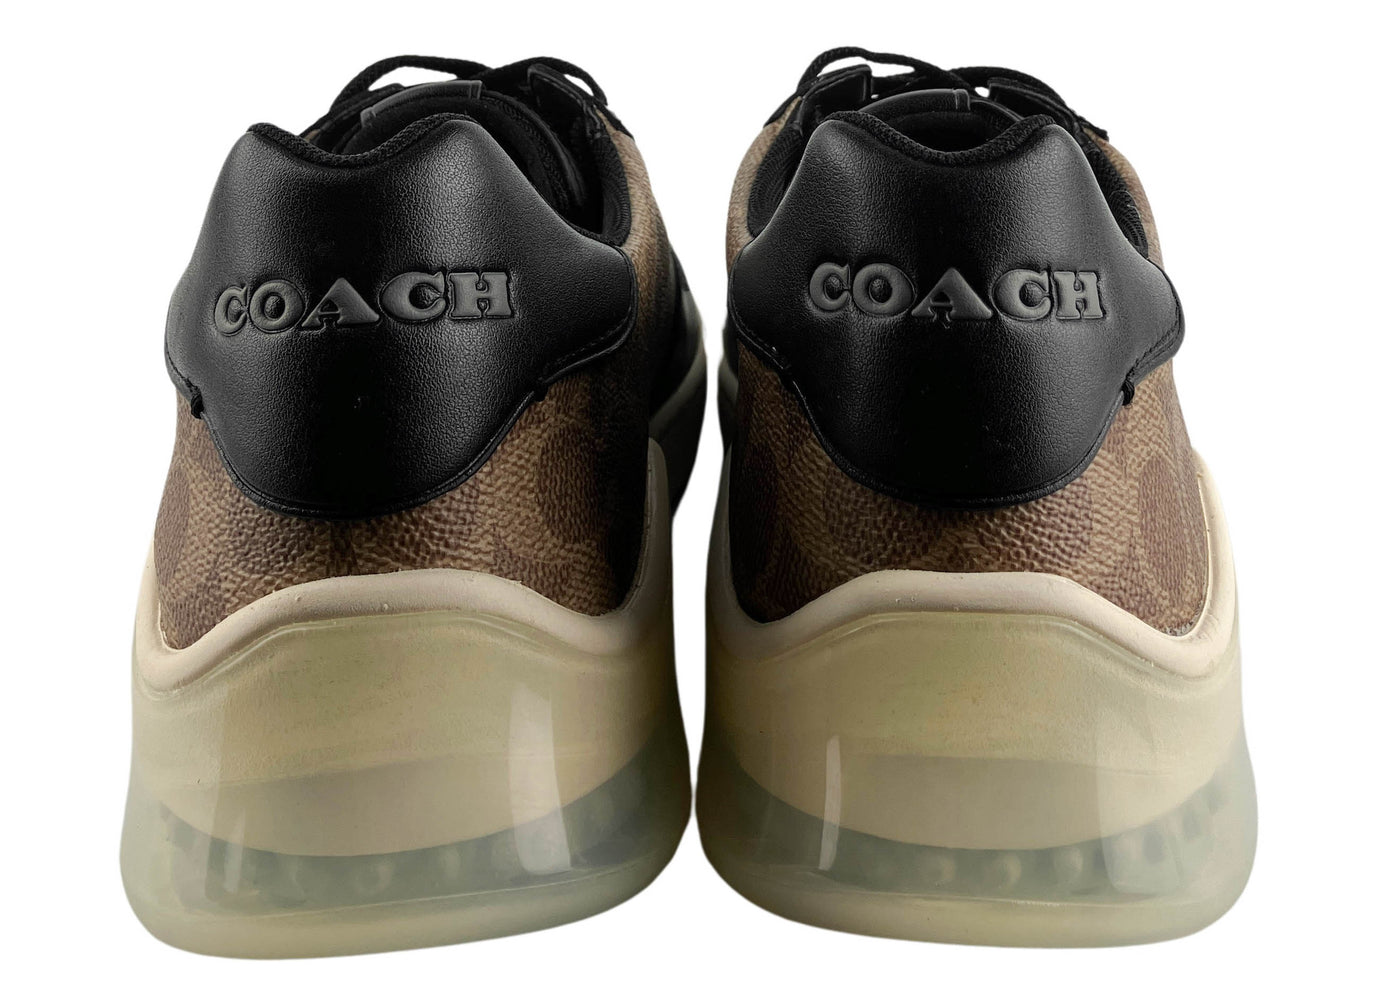 Coach City Sole Signature Court Sneakers in Tan and Black - Discounts on Coach at UAL